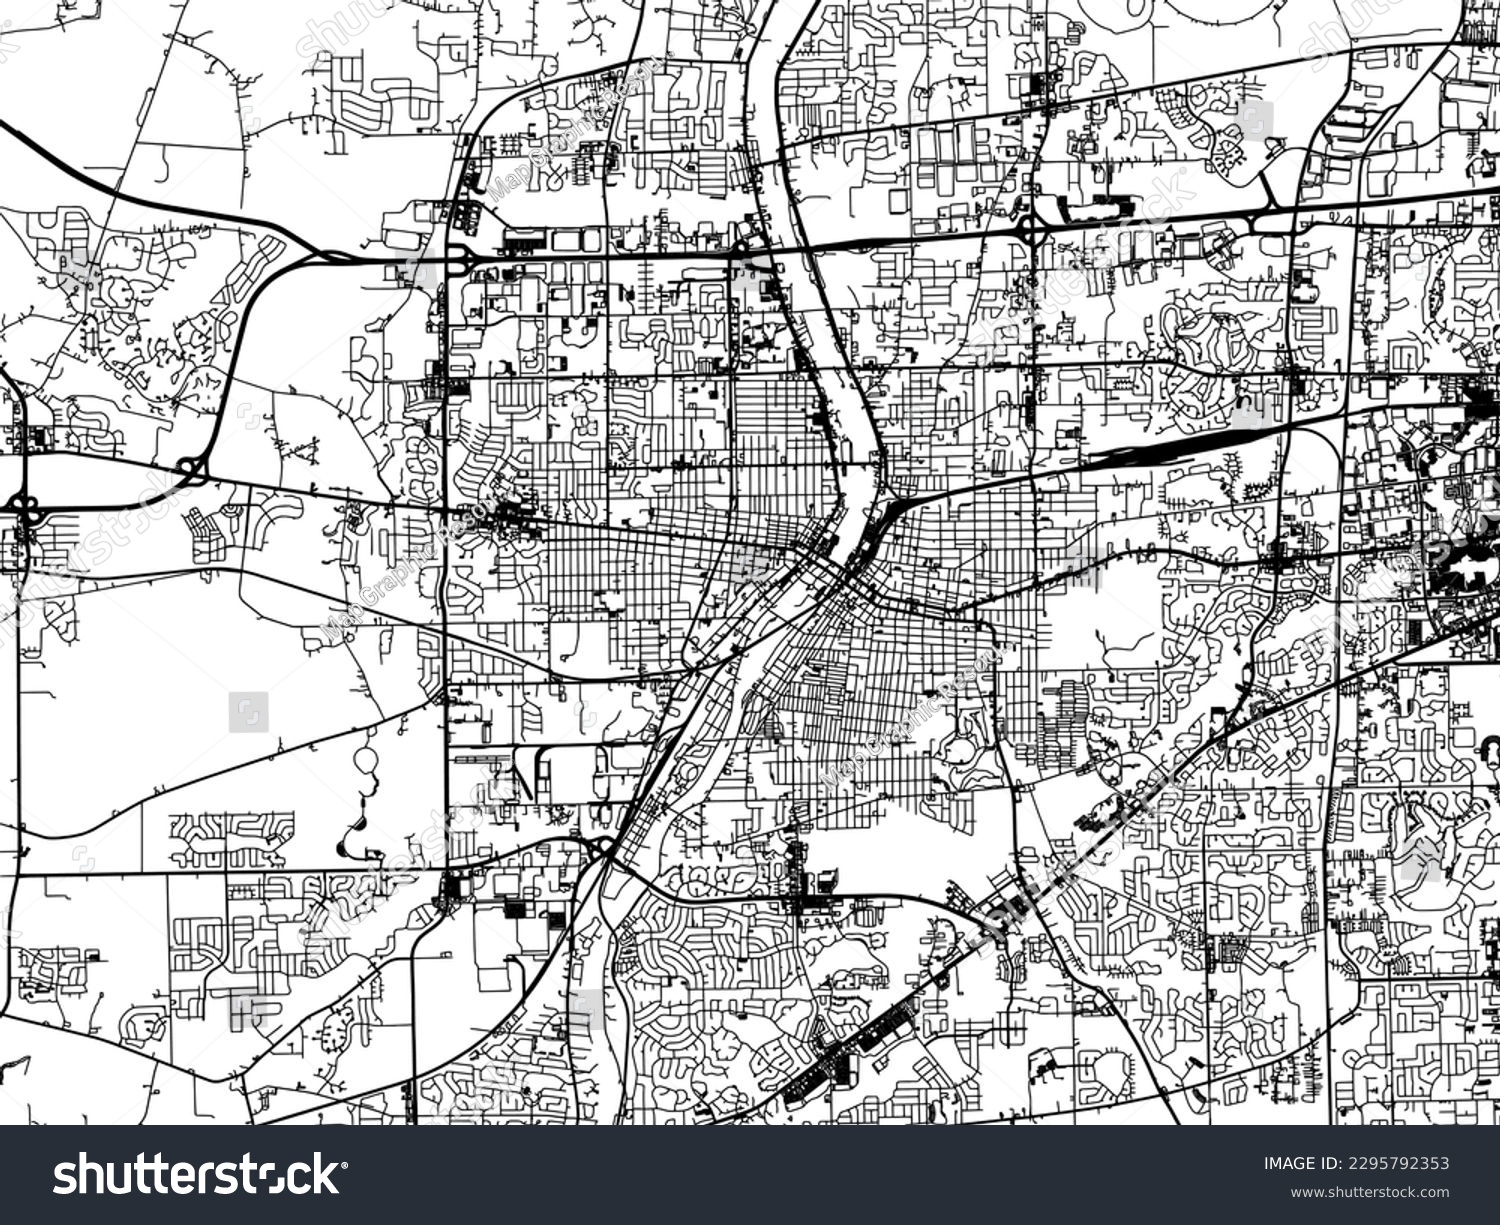 SVG of Vector city map of Aurora Illinois in the United States of America with black roads isolated on a white background. svg